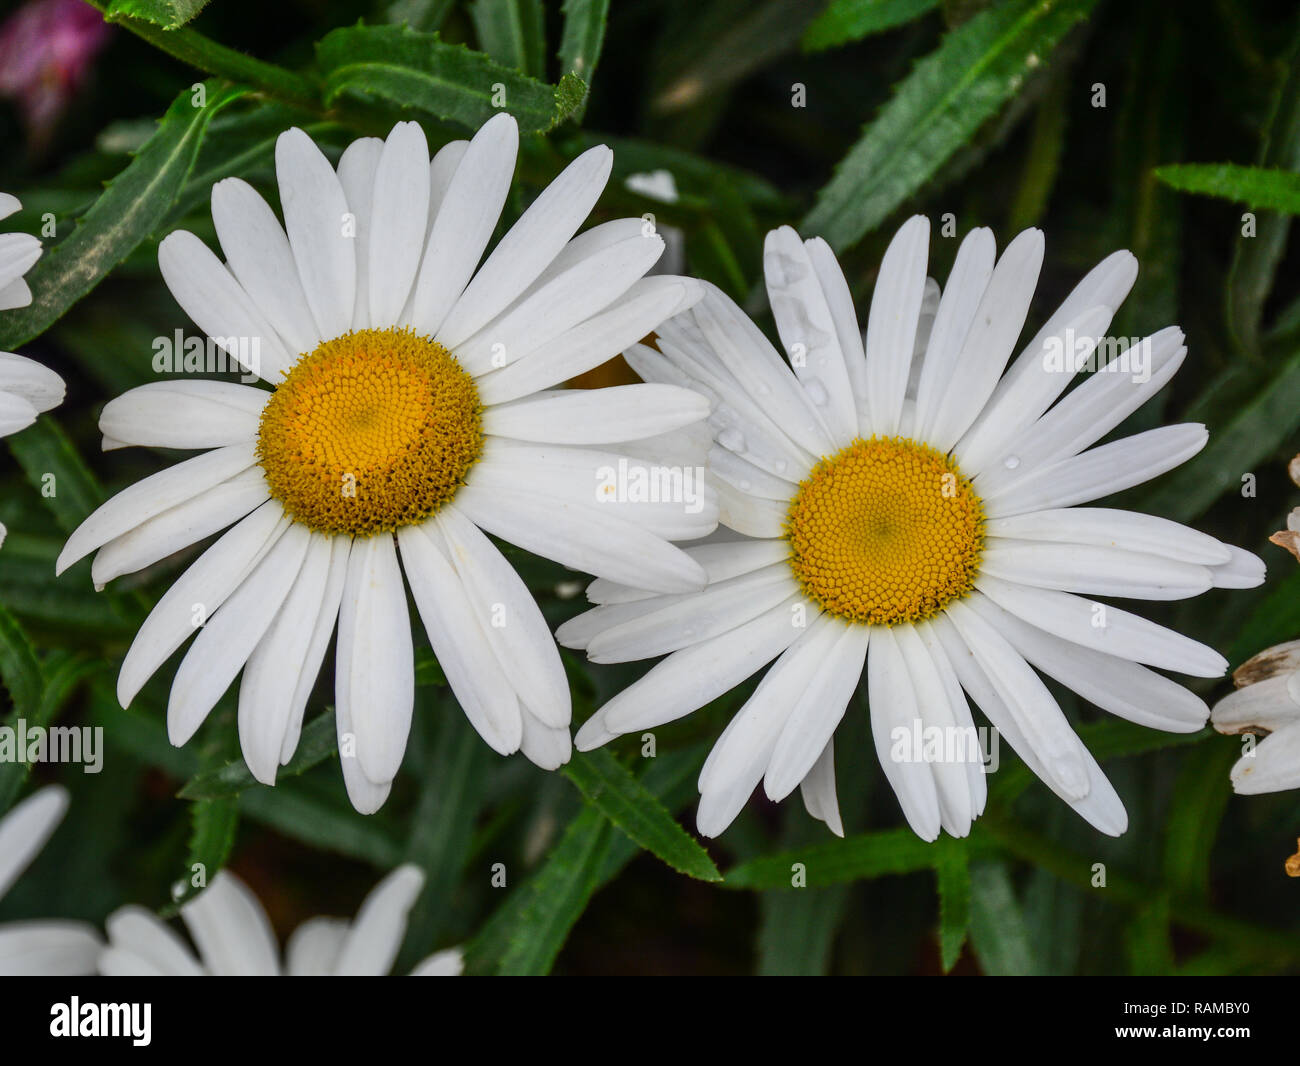 Large chamomile flowers blooming at garden in spring time. Stock Photo